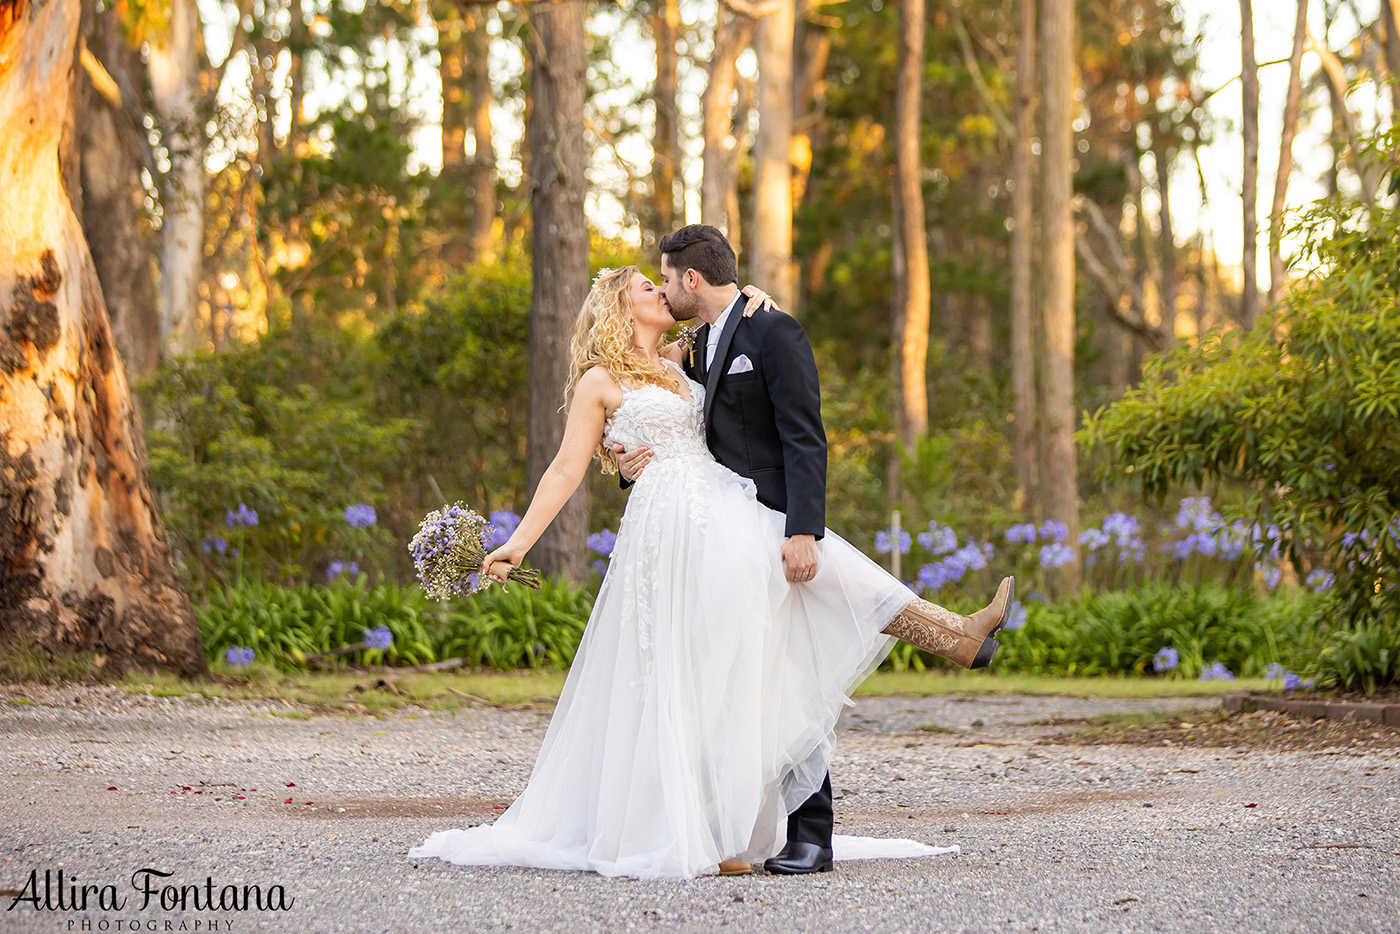 Erin's wedding photo session in Colo Vale 